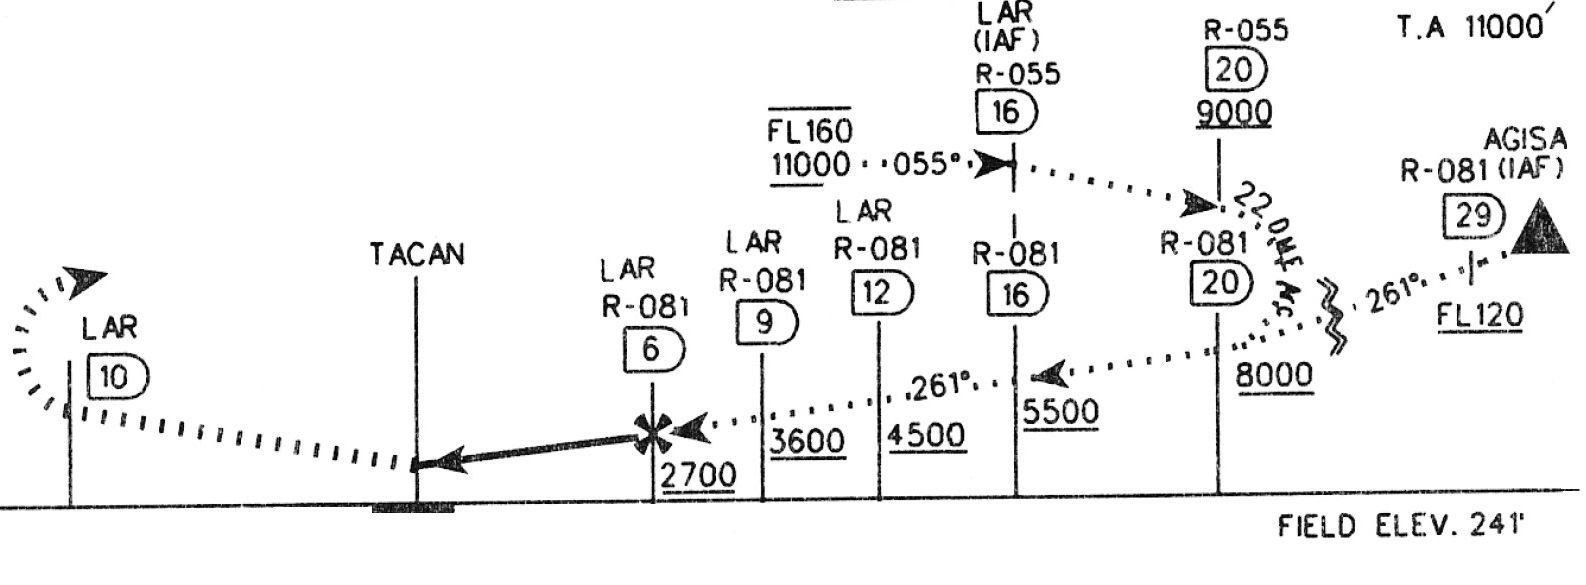 Climb on R-270 until 10 DME. Turn left to LAR TACAN 8500 or above and then to Holding Pattern 11000 or above. N48.